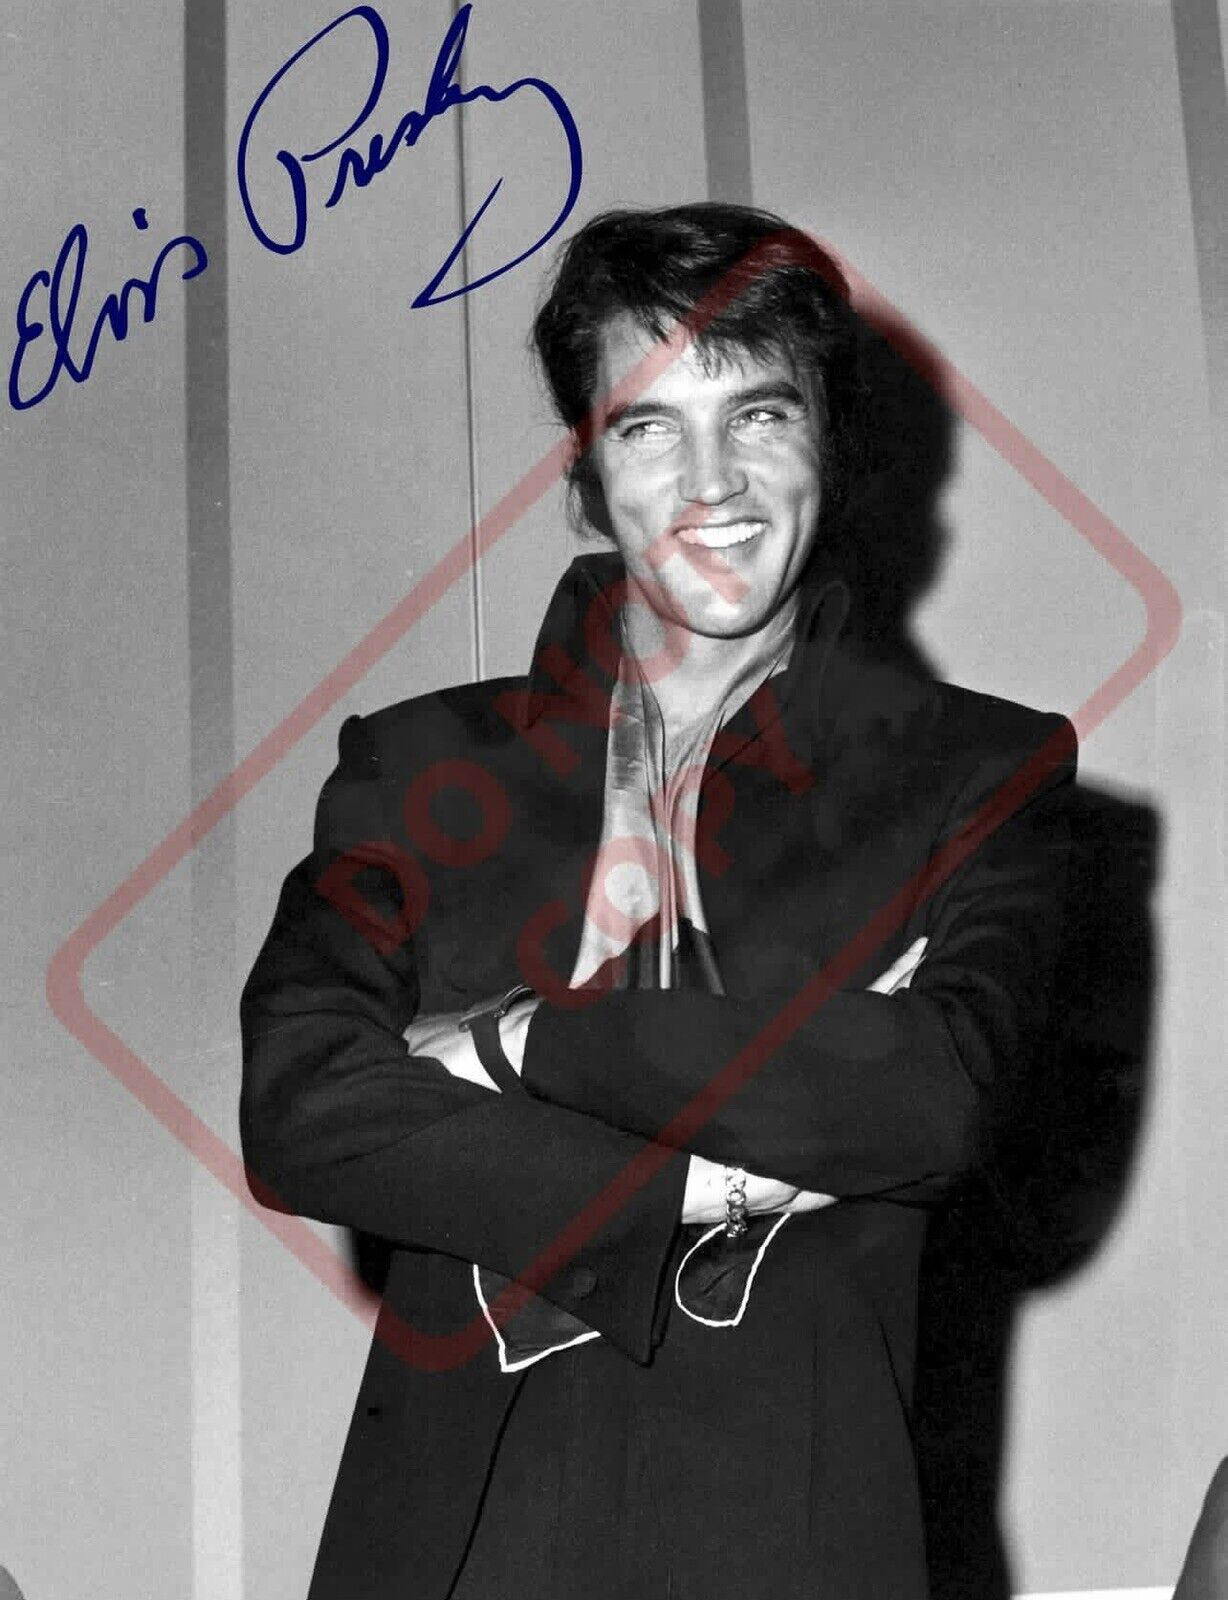 ELVIS PRESLEY SIGNED AUTOGRAPH YOUNG KING 8.5 X 11 PHOTO PICTURE REPRINT